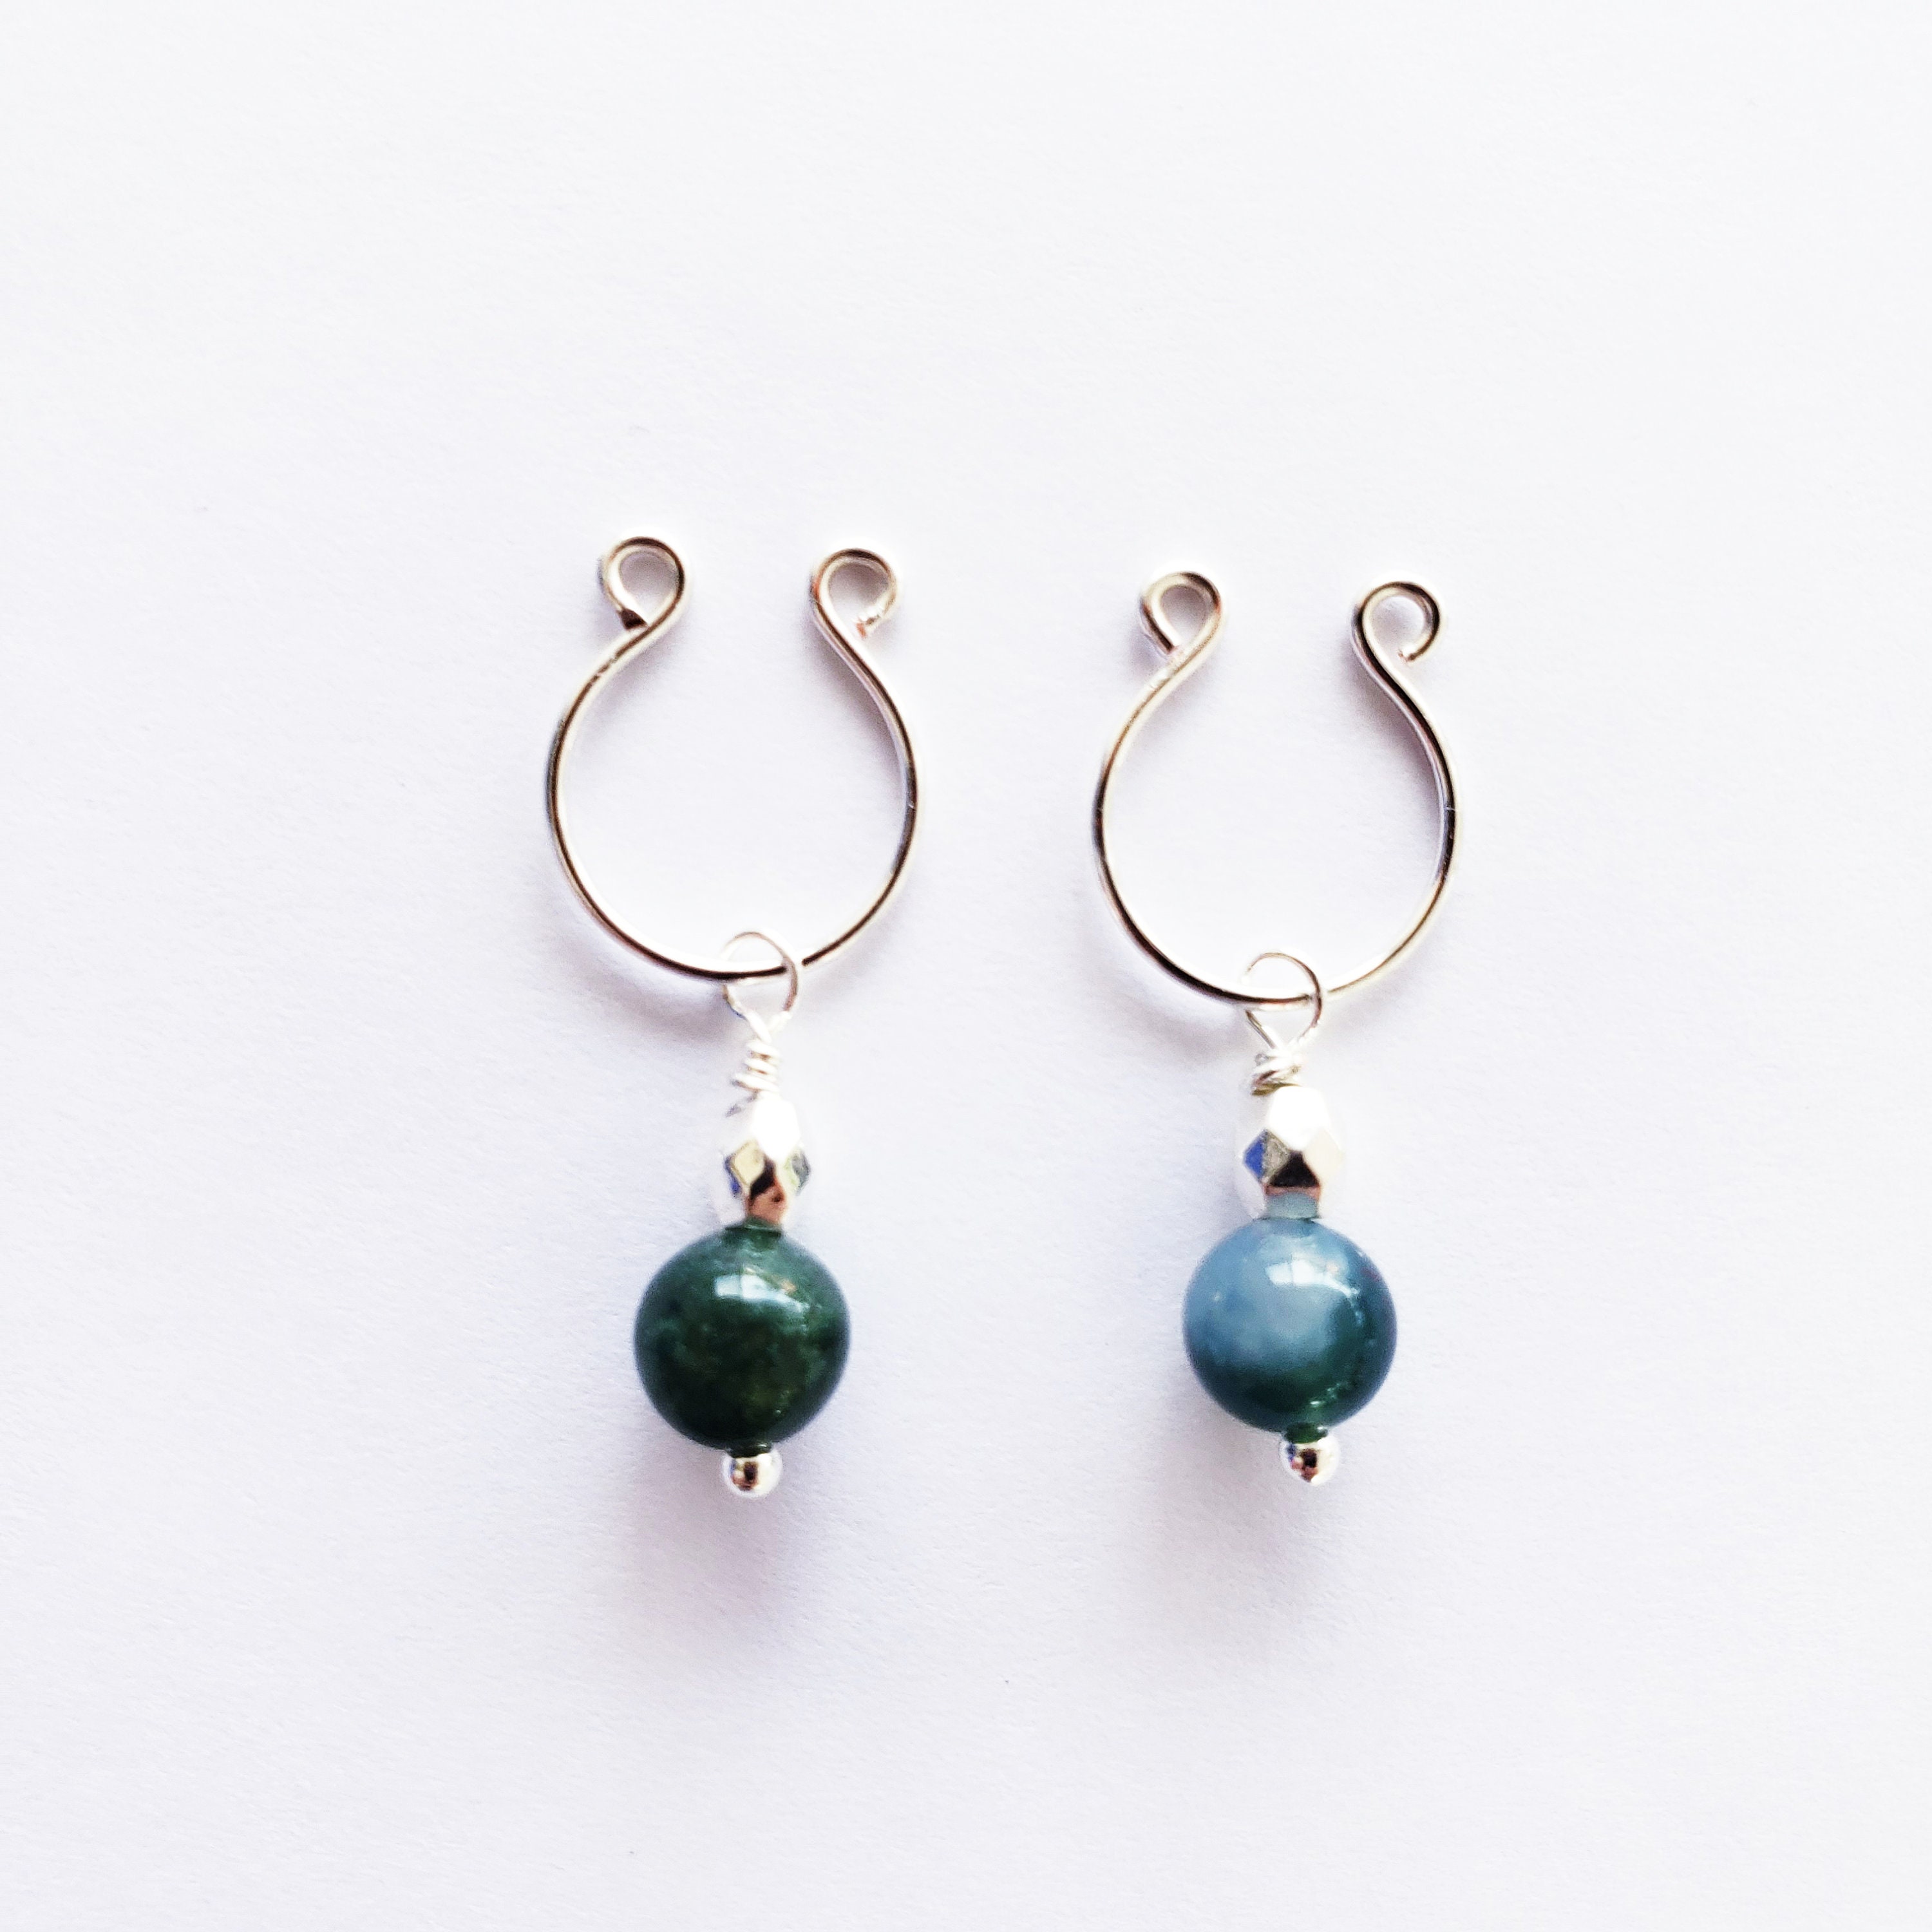 Non Piercing Nipple Rings with Jasper Dangles. MATURE. Intimate Body Jewelry for Women, Not Pierced. photo